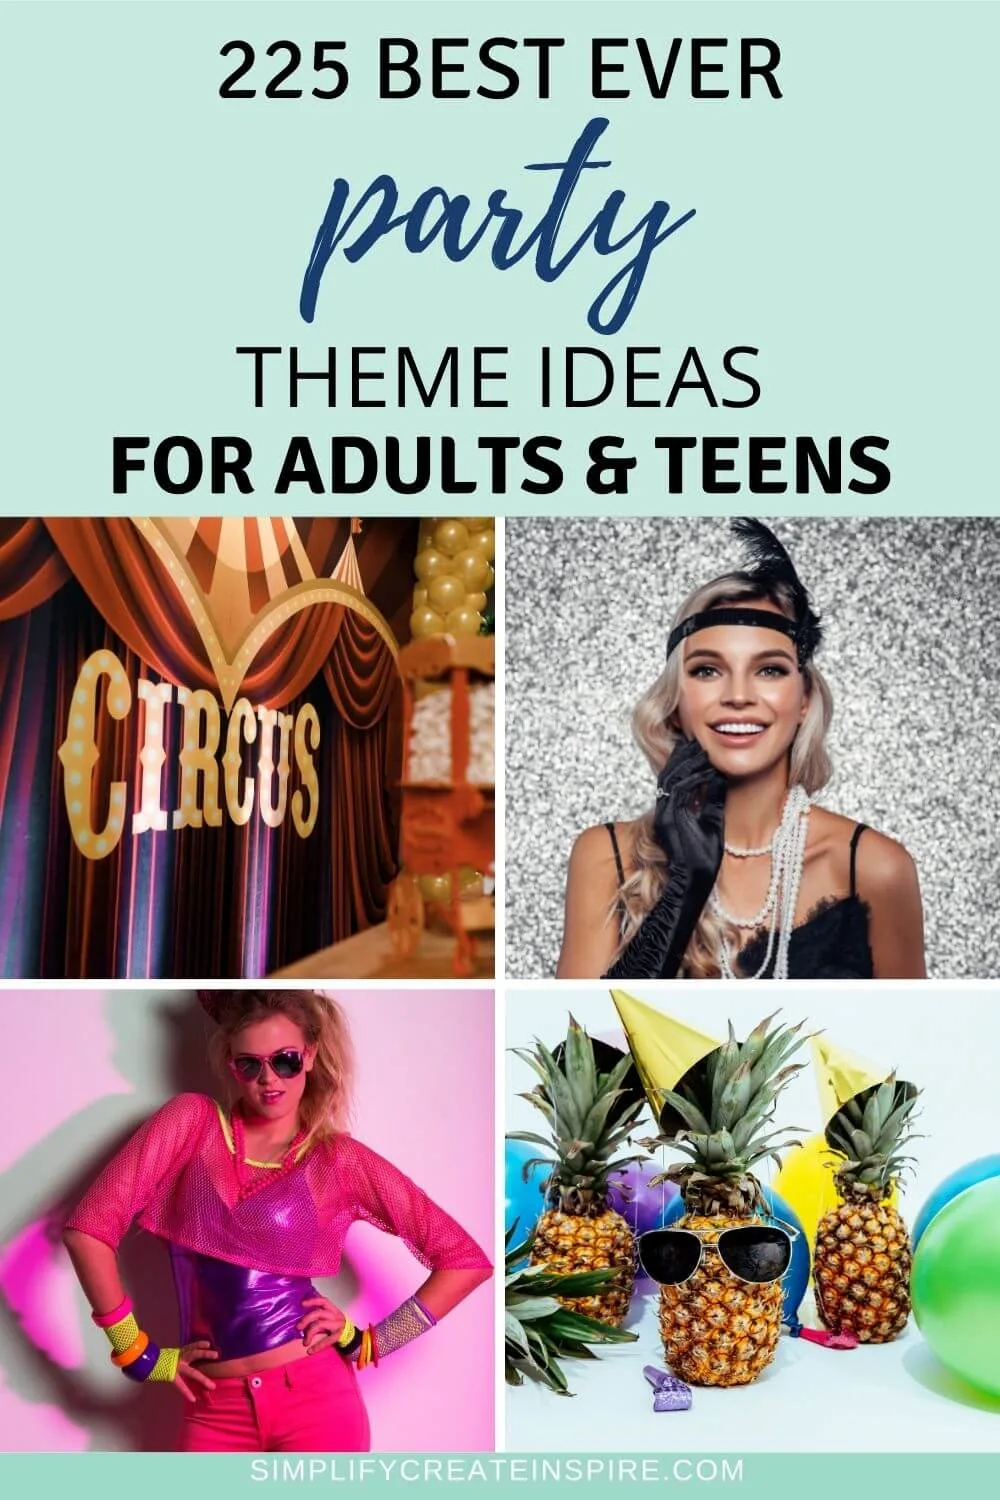 List of party themes for adults